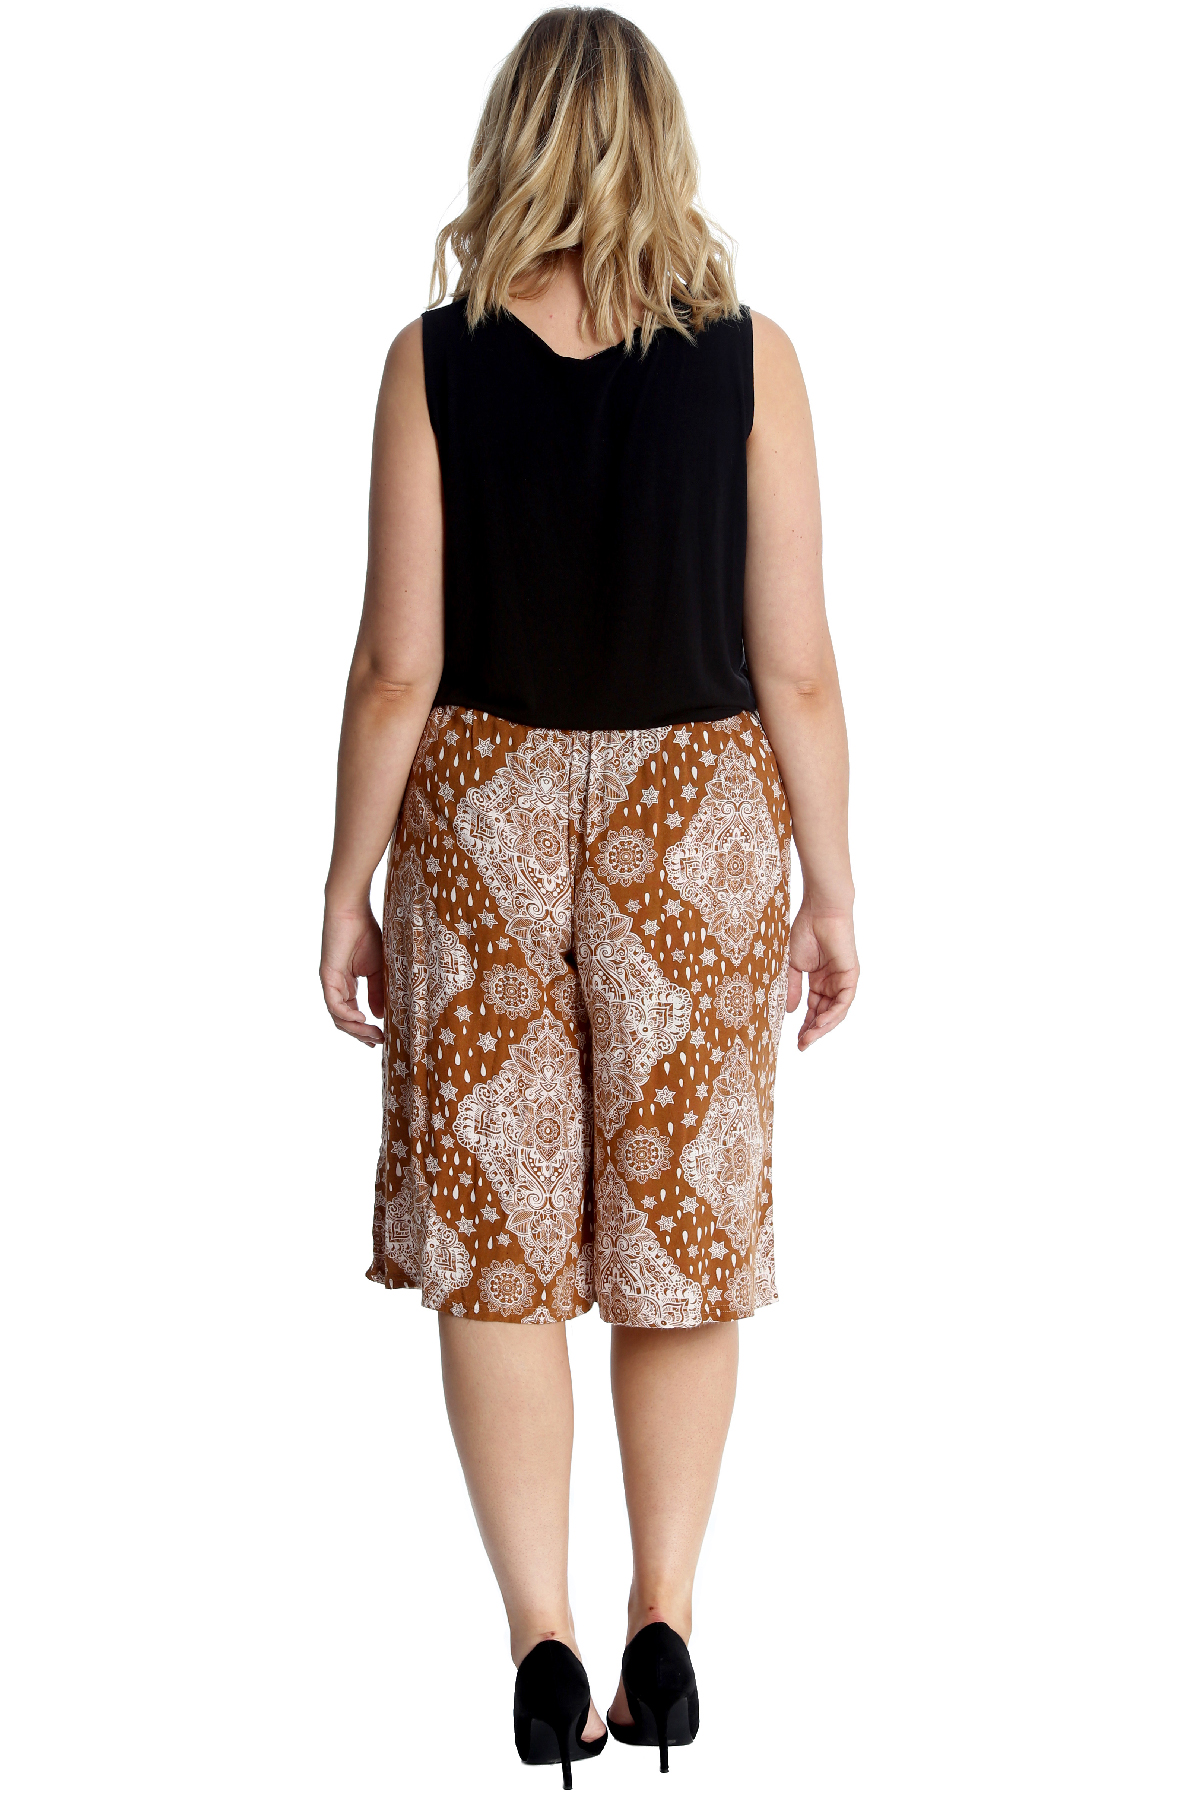 New Womens Plus Size Culottes Ladies Moroccan Tile Print Shorts Knee Length Ebay